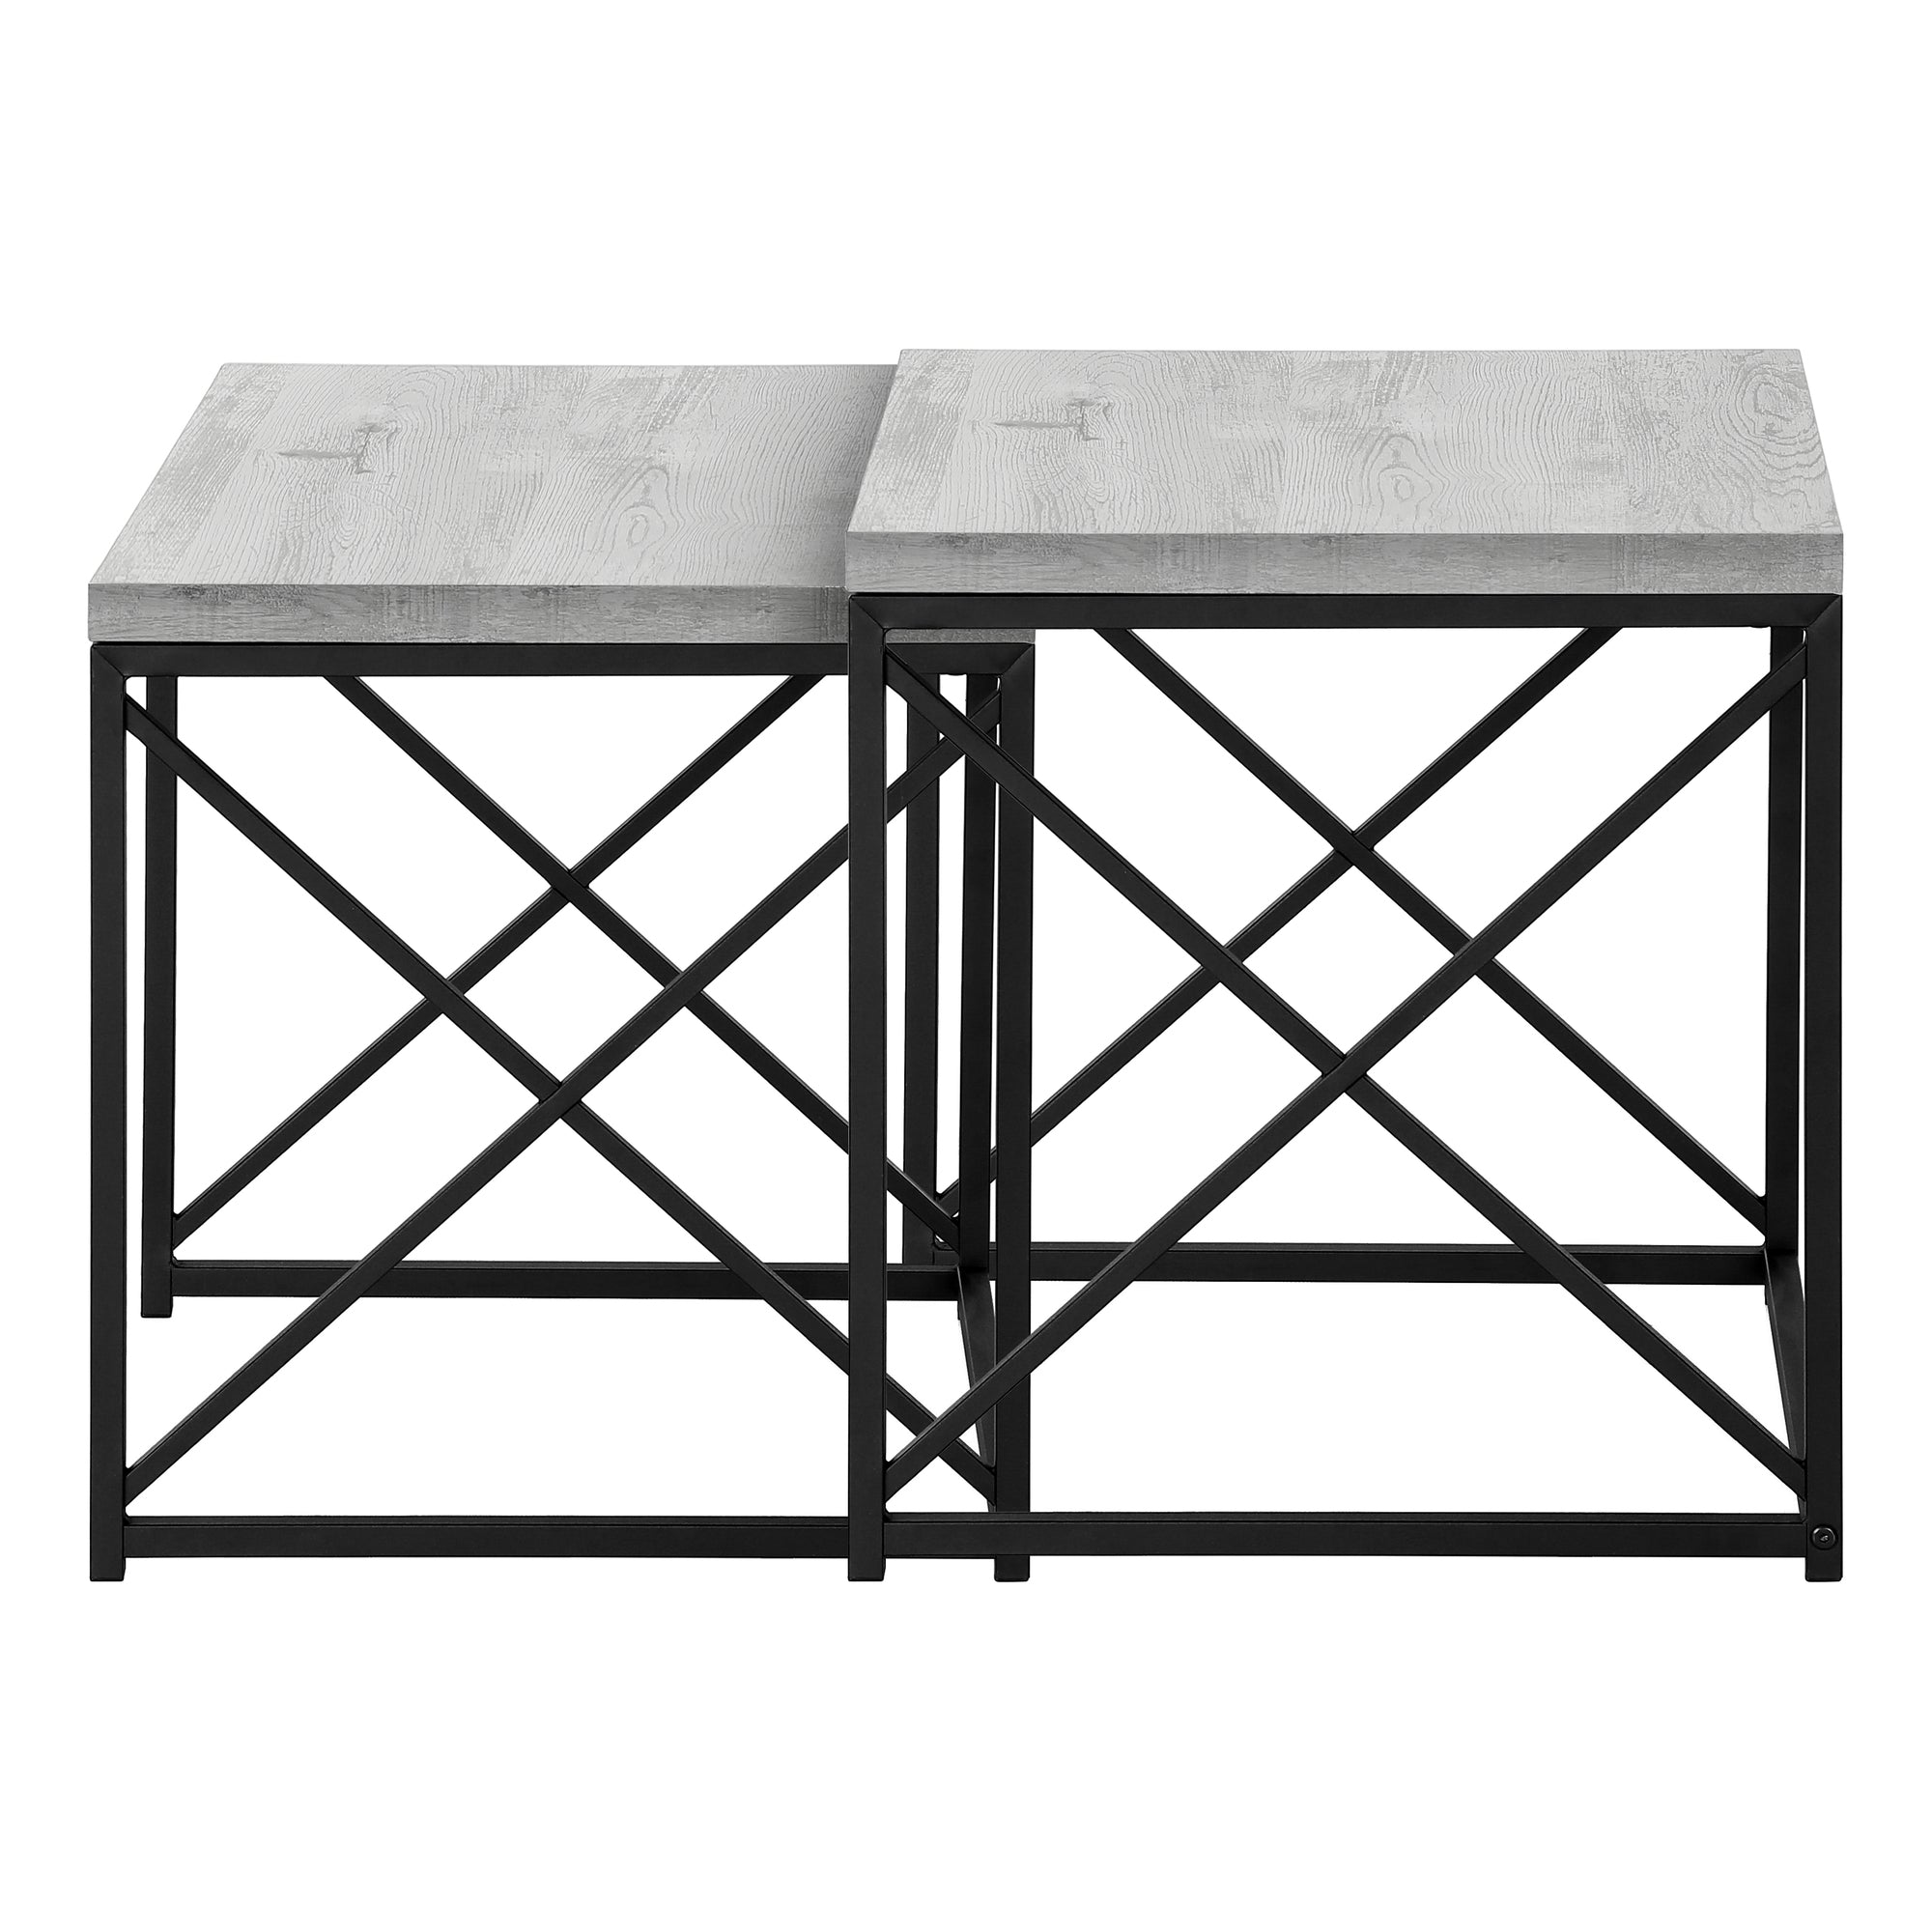 MN-543414    Nesting Table, Set Of 2, Side, End, Metal, Accent, Living Room, Bedroom, Metal Base, Laminate, Grey Reclaimed Wood Look, Black, Contemporary, Modern